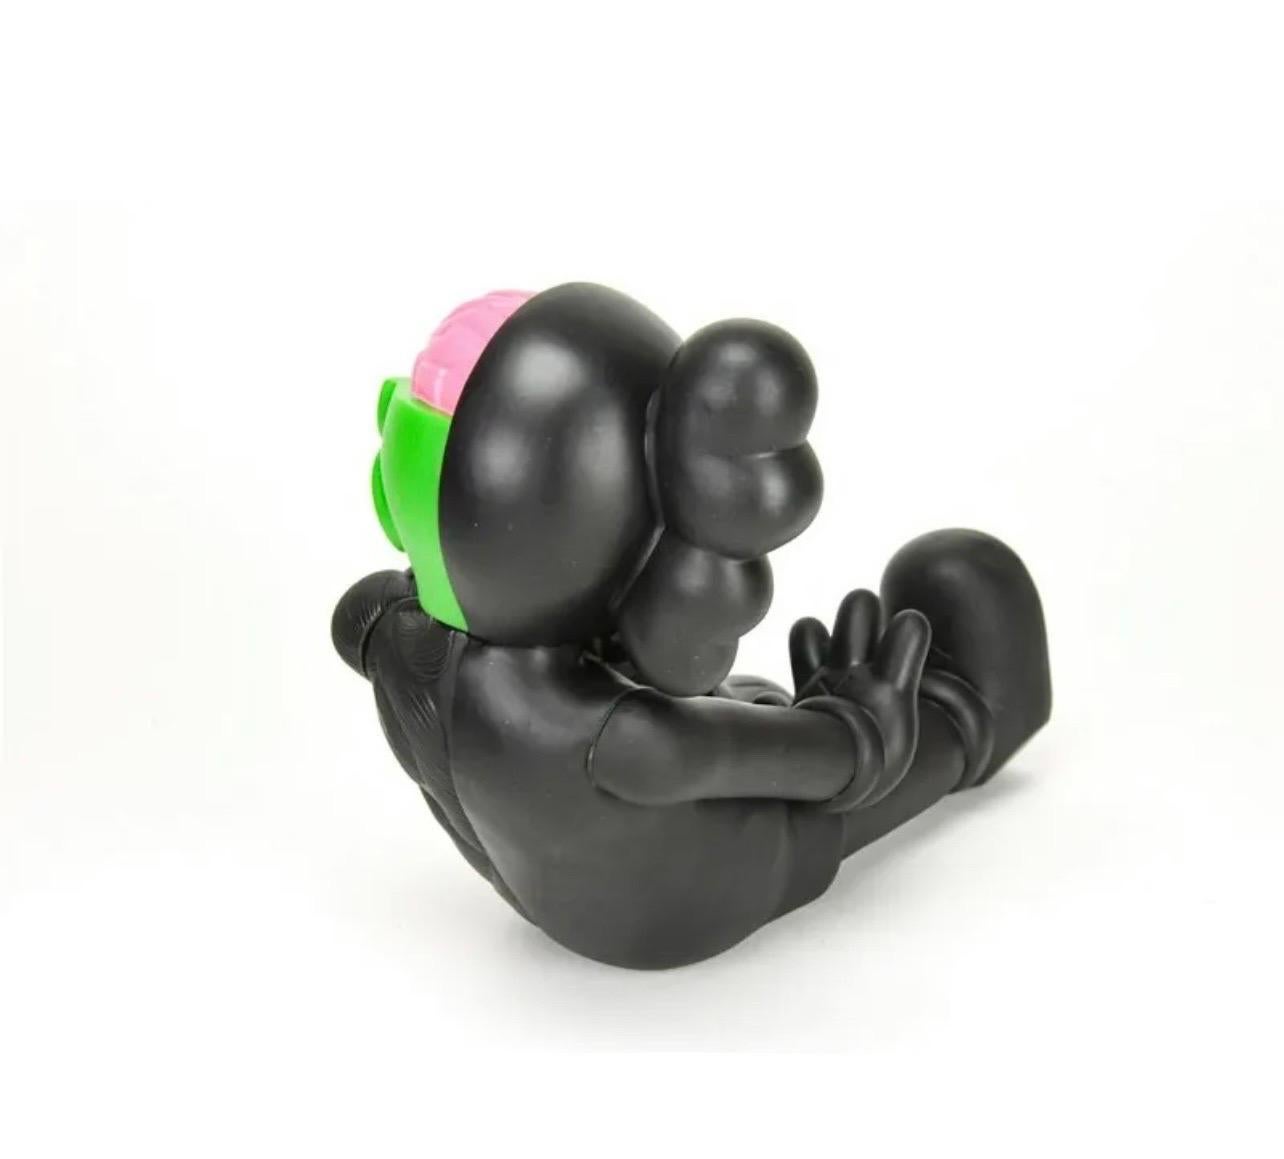 American Wonderful Modern Kaws Seated Black Dissected Flayed Companion 2013 Sculpture For Sale